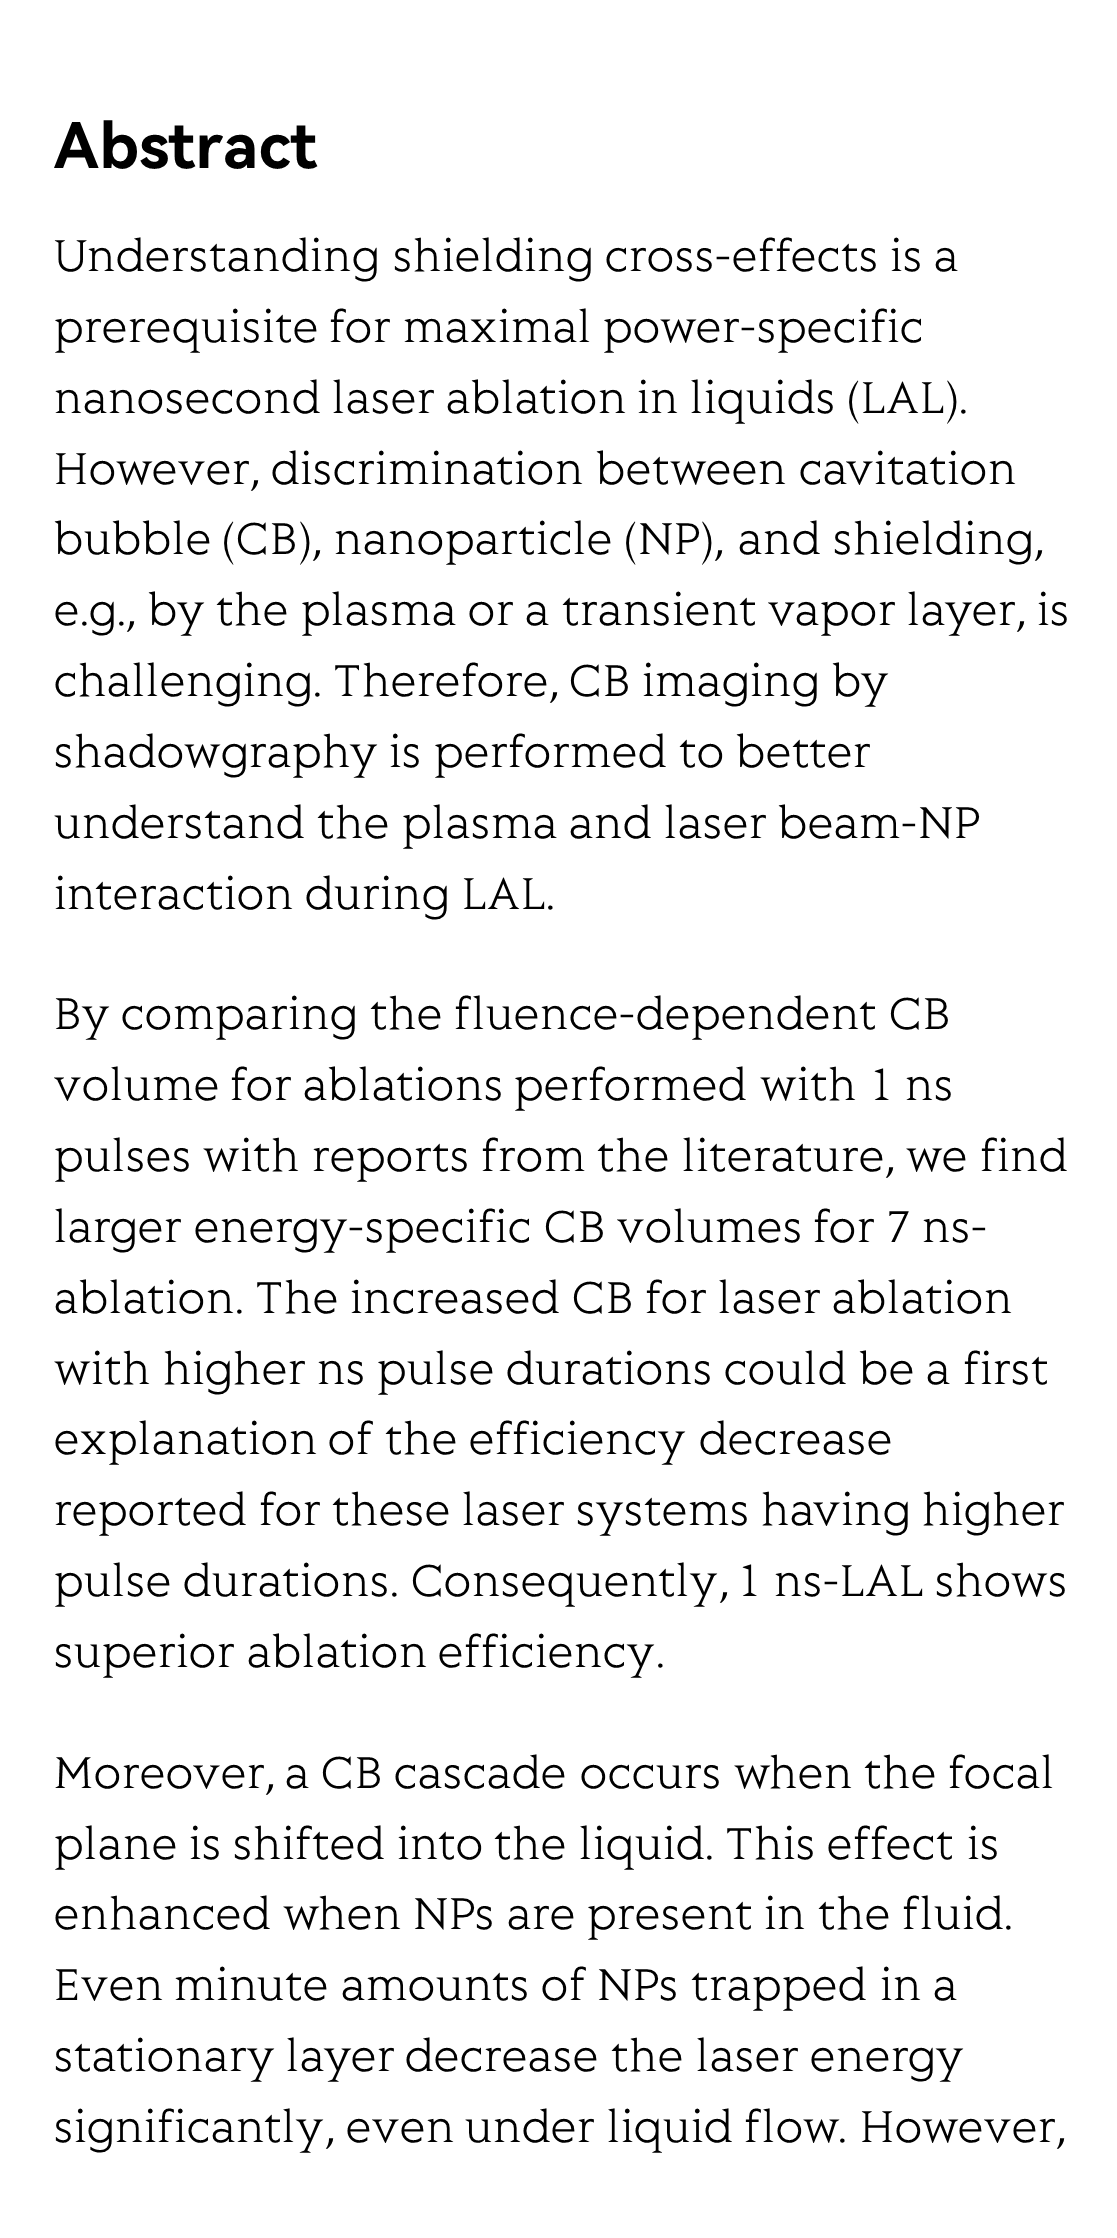 Plasma and nanoparticle shielding during pulsed laser ablation in liquids cause ablation efficiency decrease_2